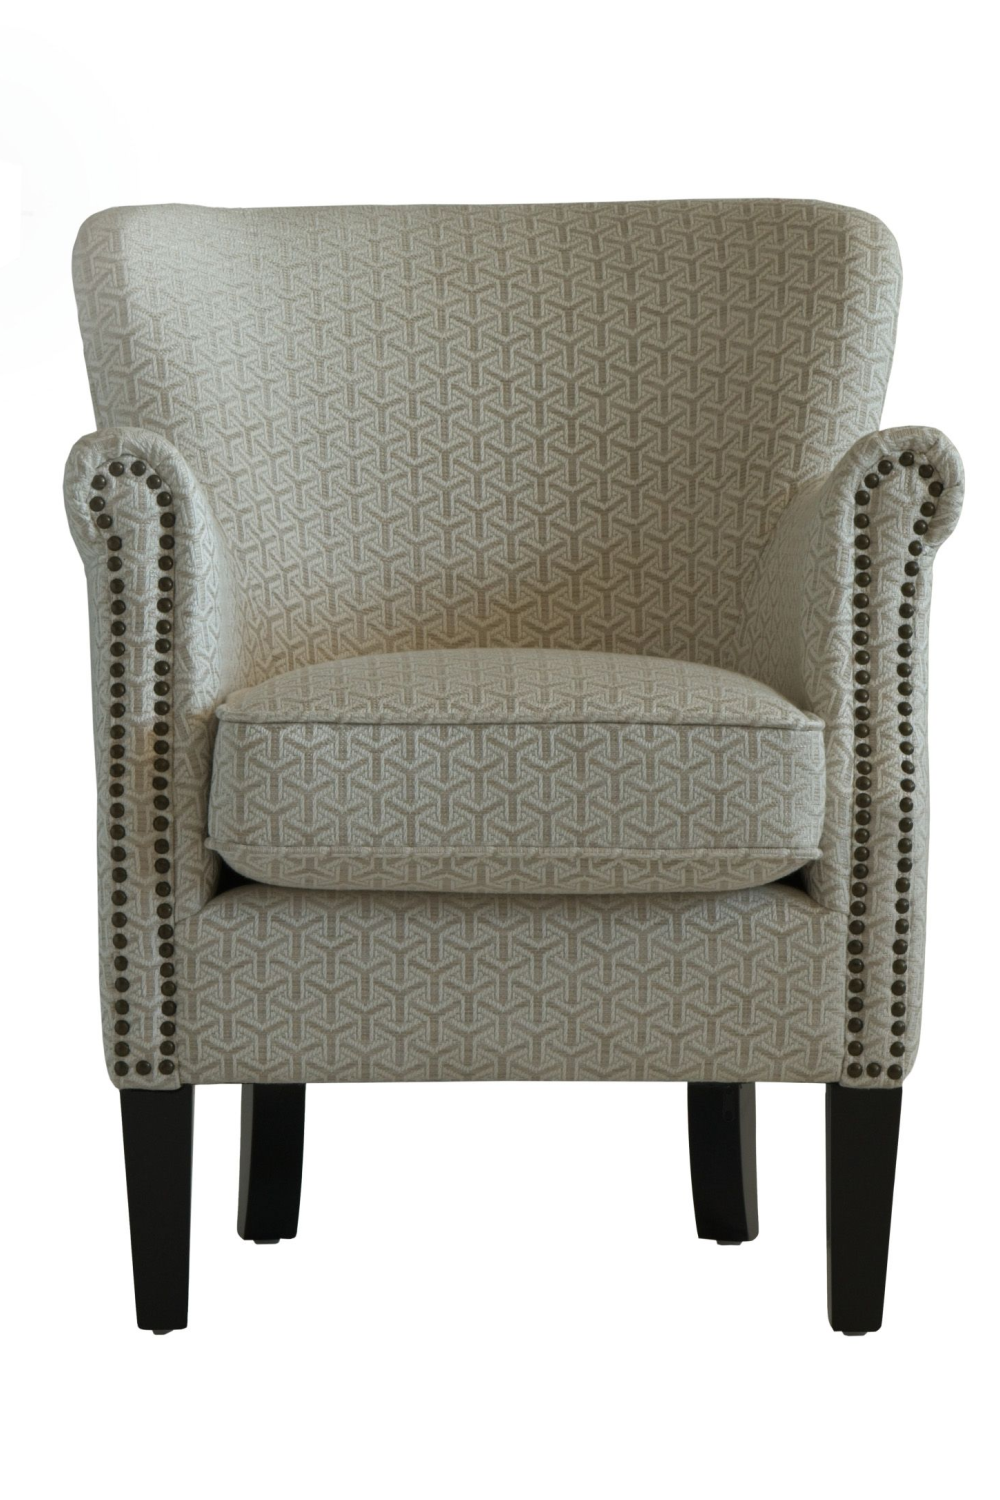 Rollover Arm Studded Accent Chair | Andrew Martin Greyhound | Oroa.com